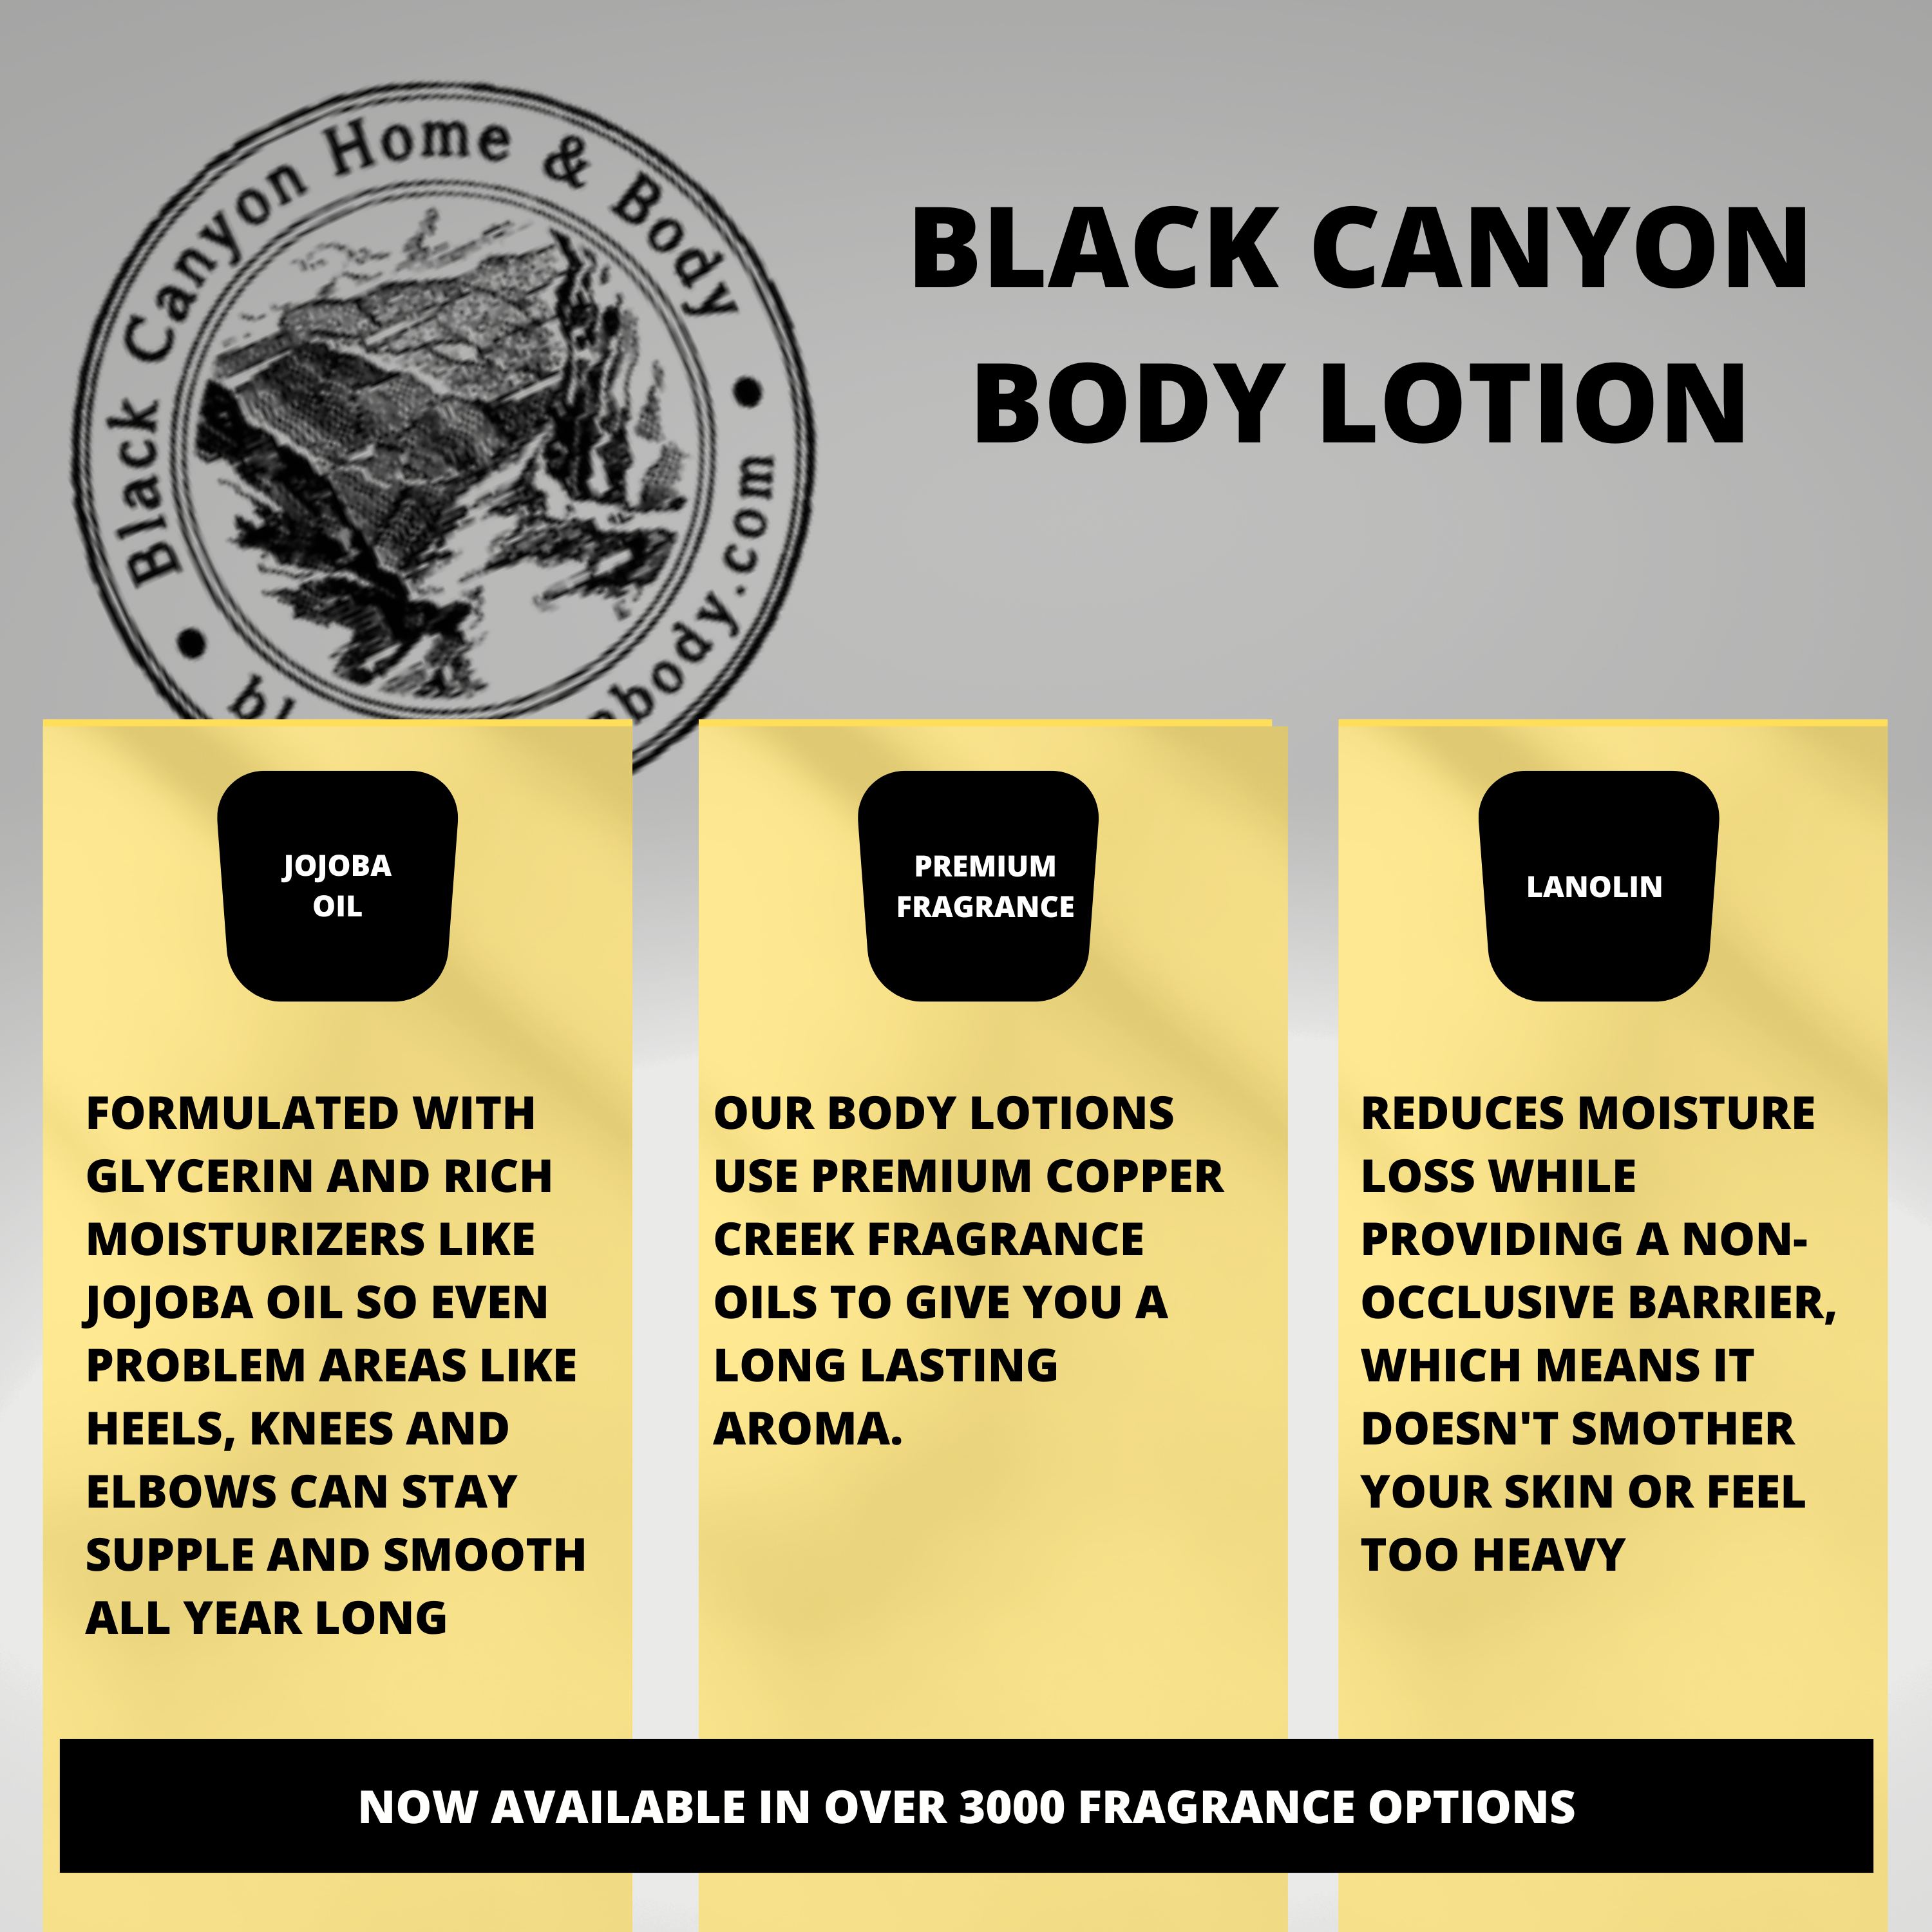 Black Canyon Lily & Peach Scented Luxury Body Lotion with Lanolin and Jojoba Oil